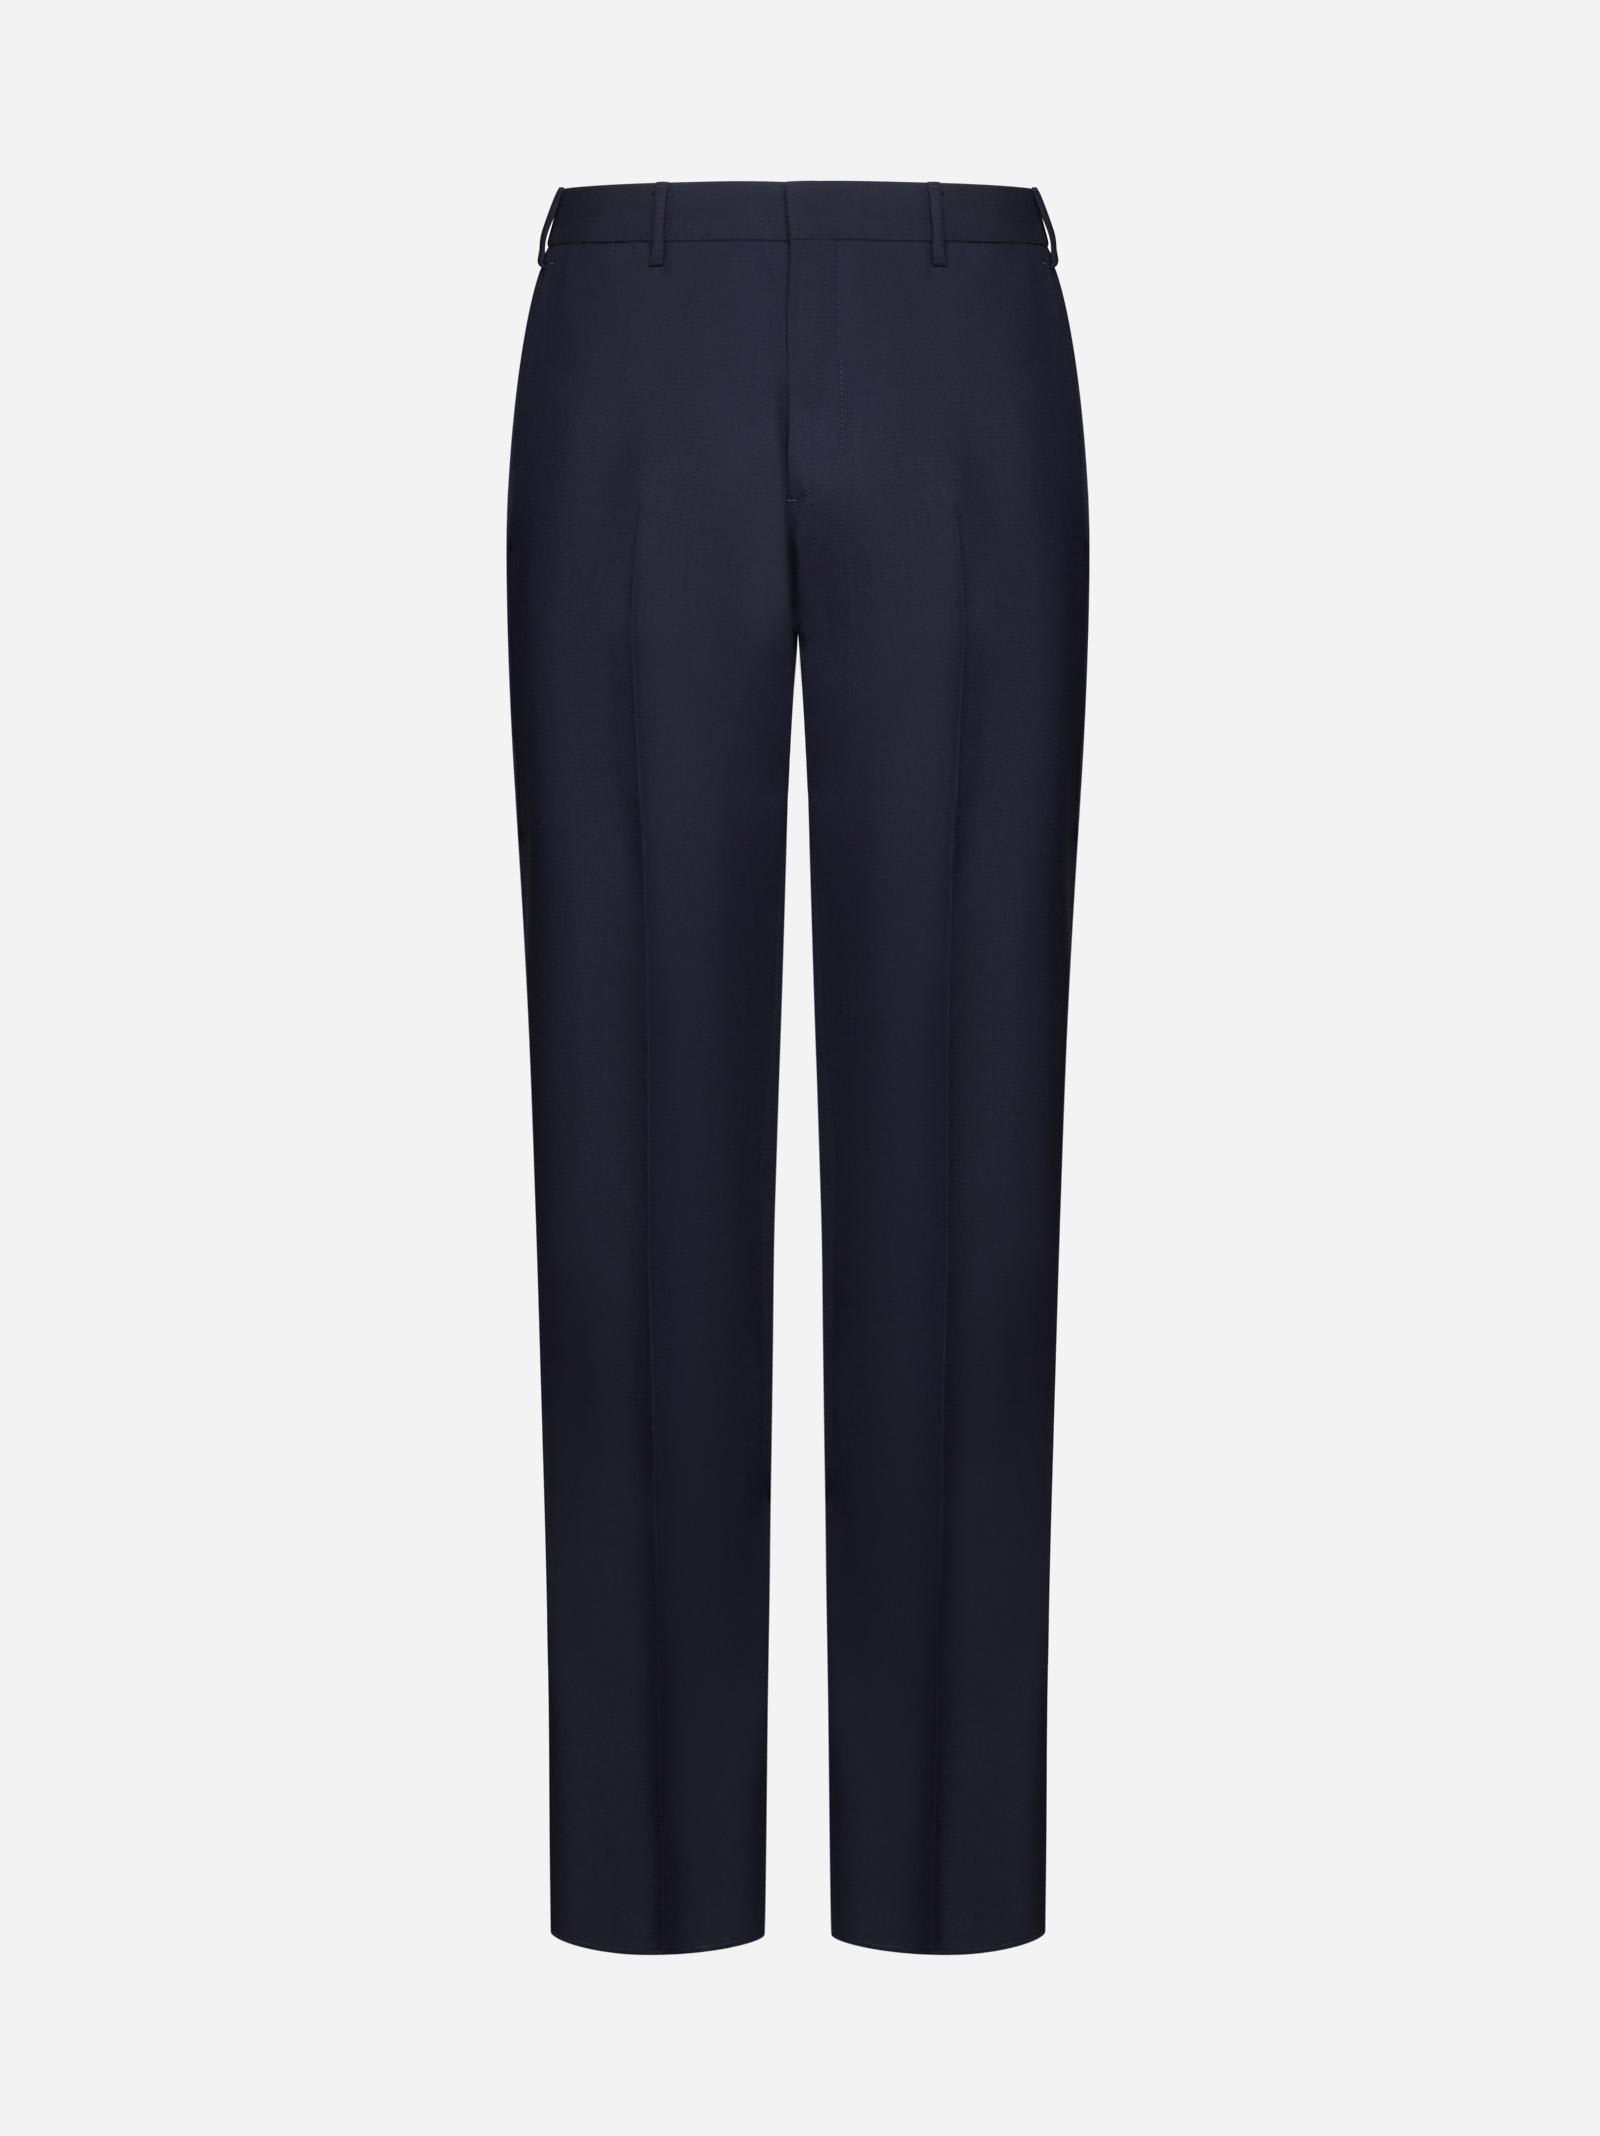 Mohair Wool Trousers